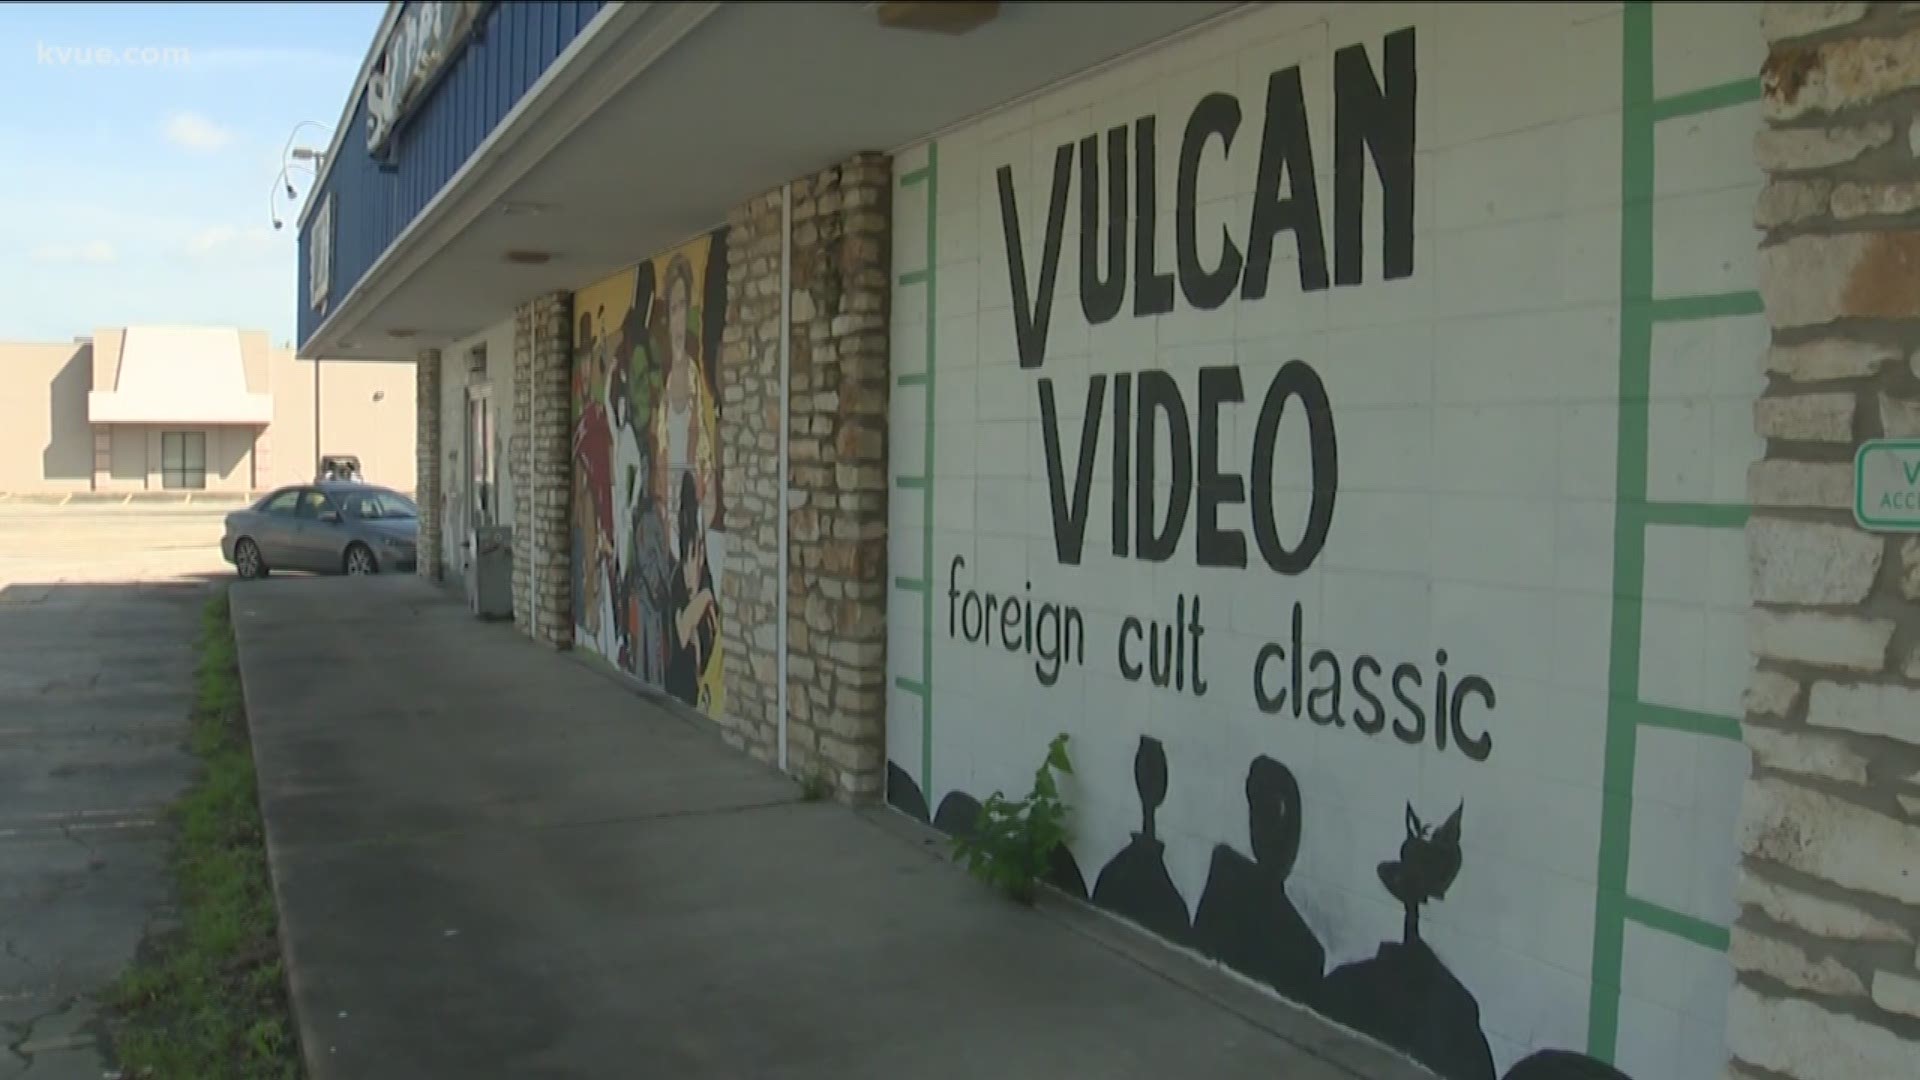 For 35 years, Austin movie fans visited Vulcan Video to find films they couldn't get anywhere else.